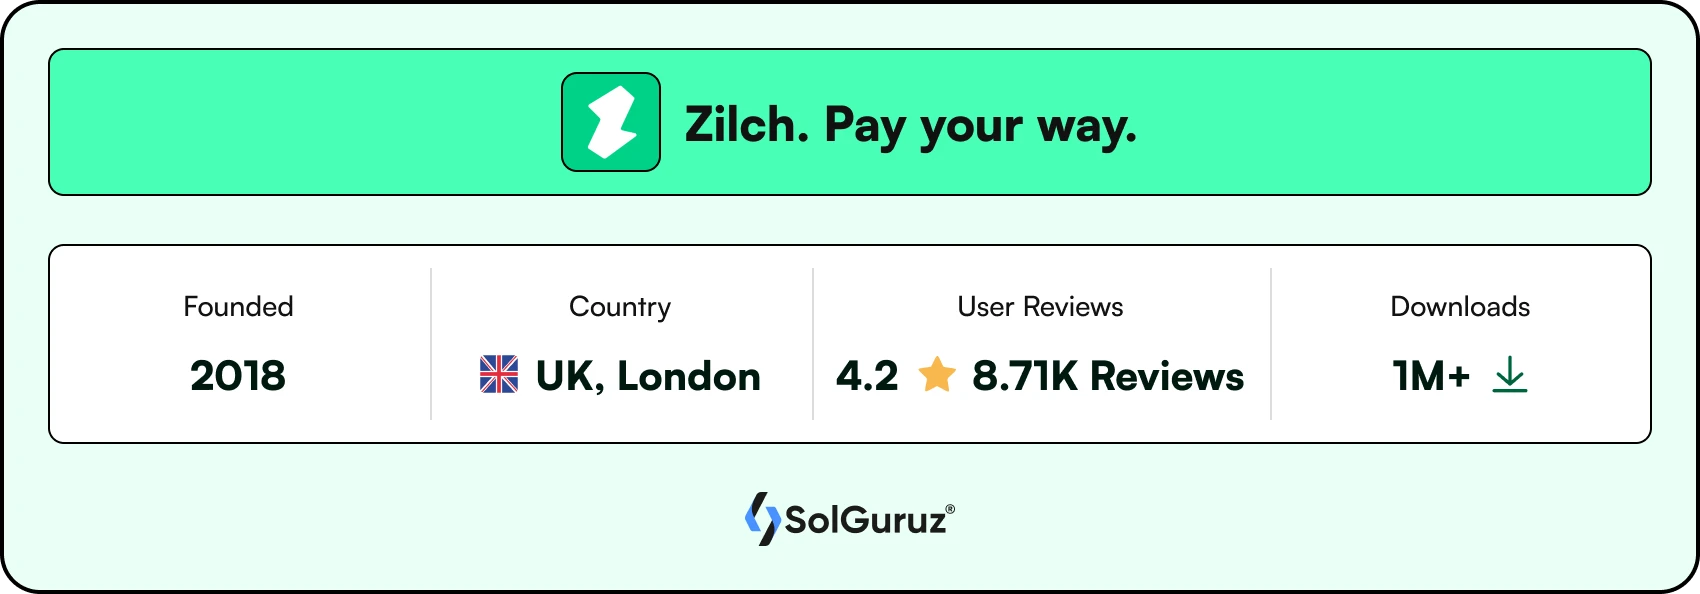 Zilch - Pay your way